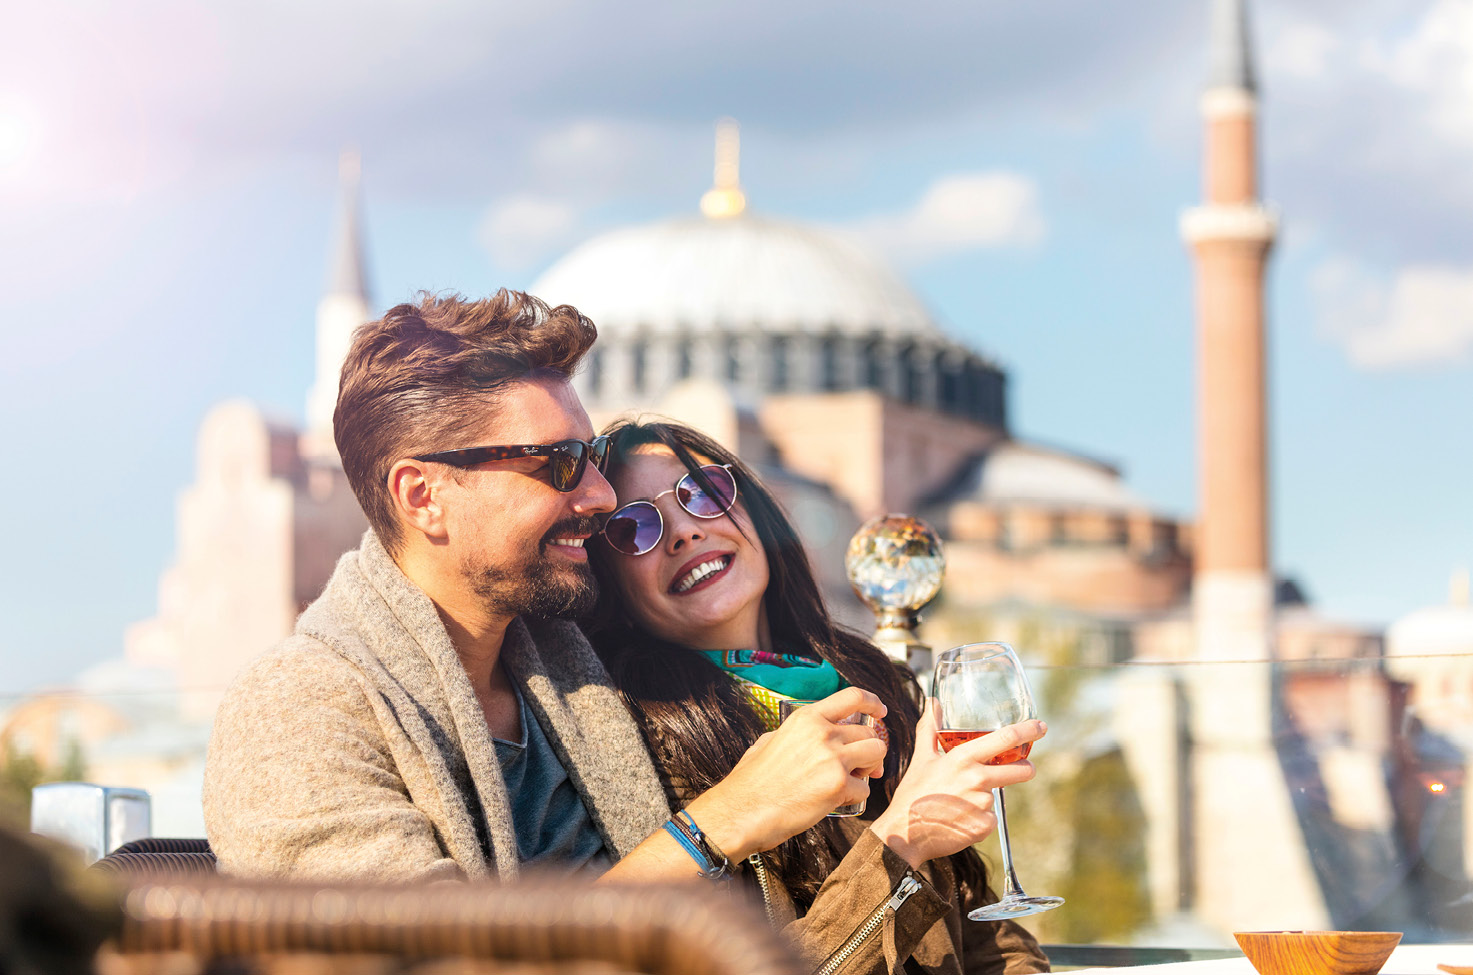 A smiling couple each enjoy a glass of wine on a balcony with views of Istanbul’s Sultanahmet in the background